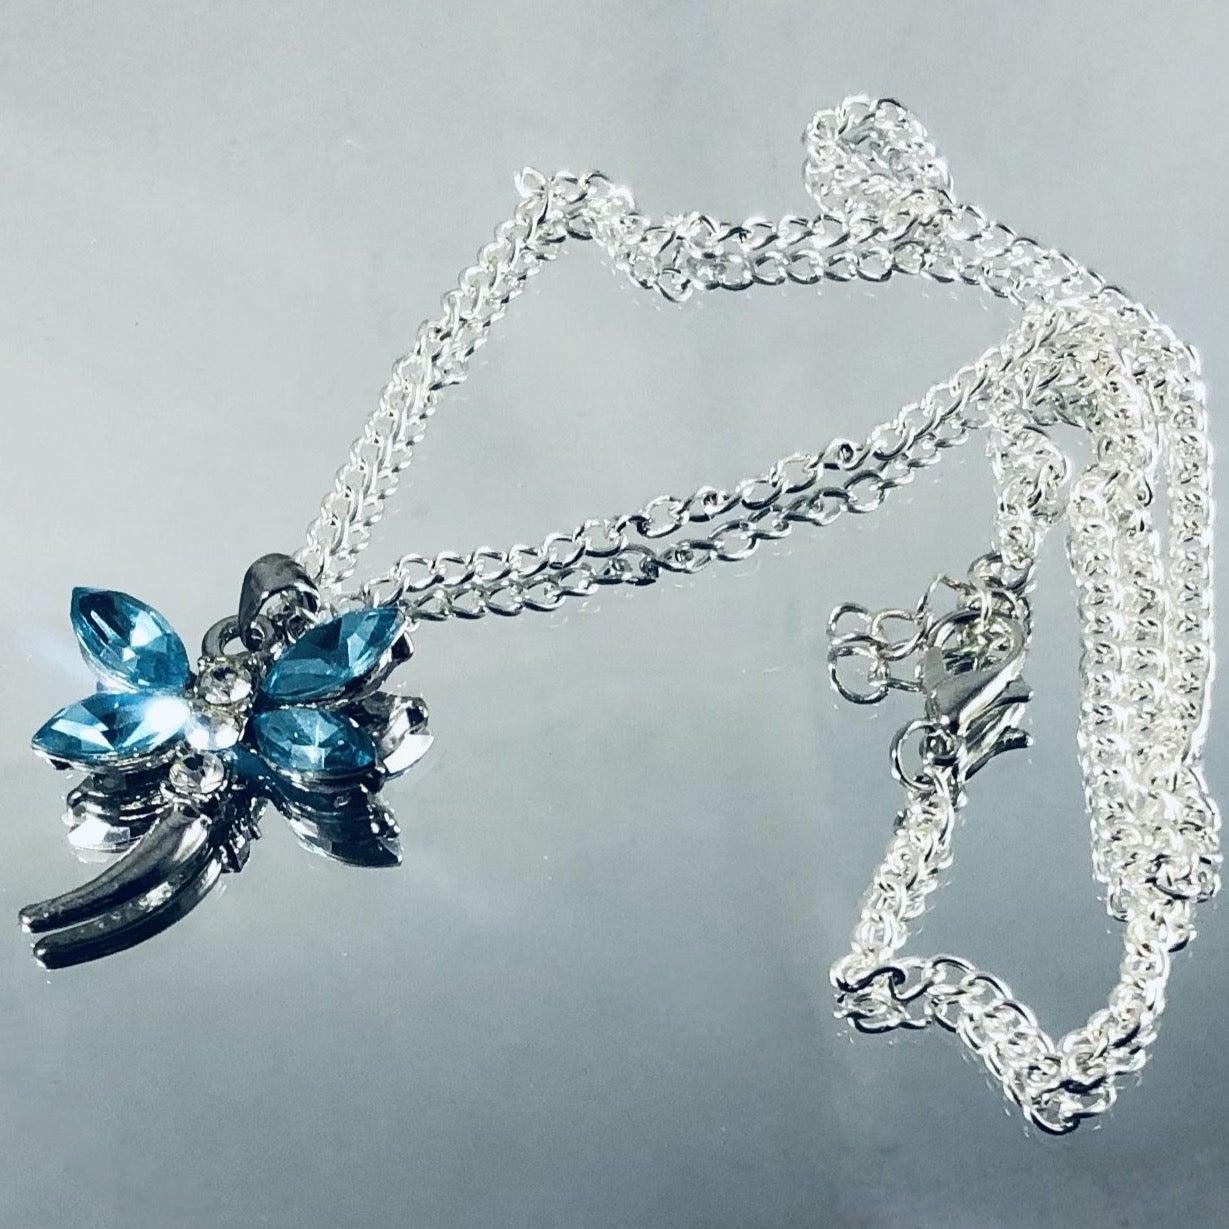 Blue Butterfly Silver-plated Pendant Necklace KAS WARWAS